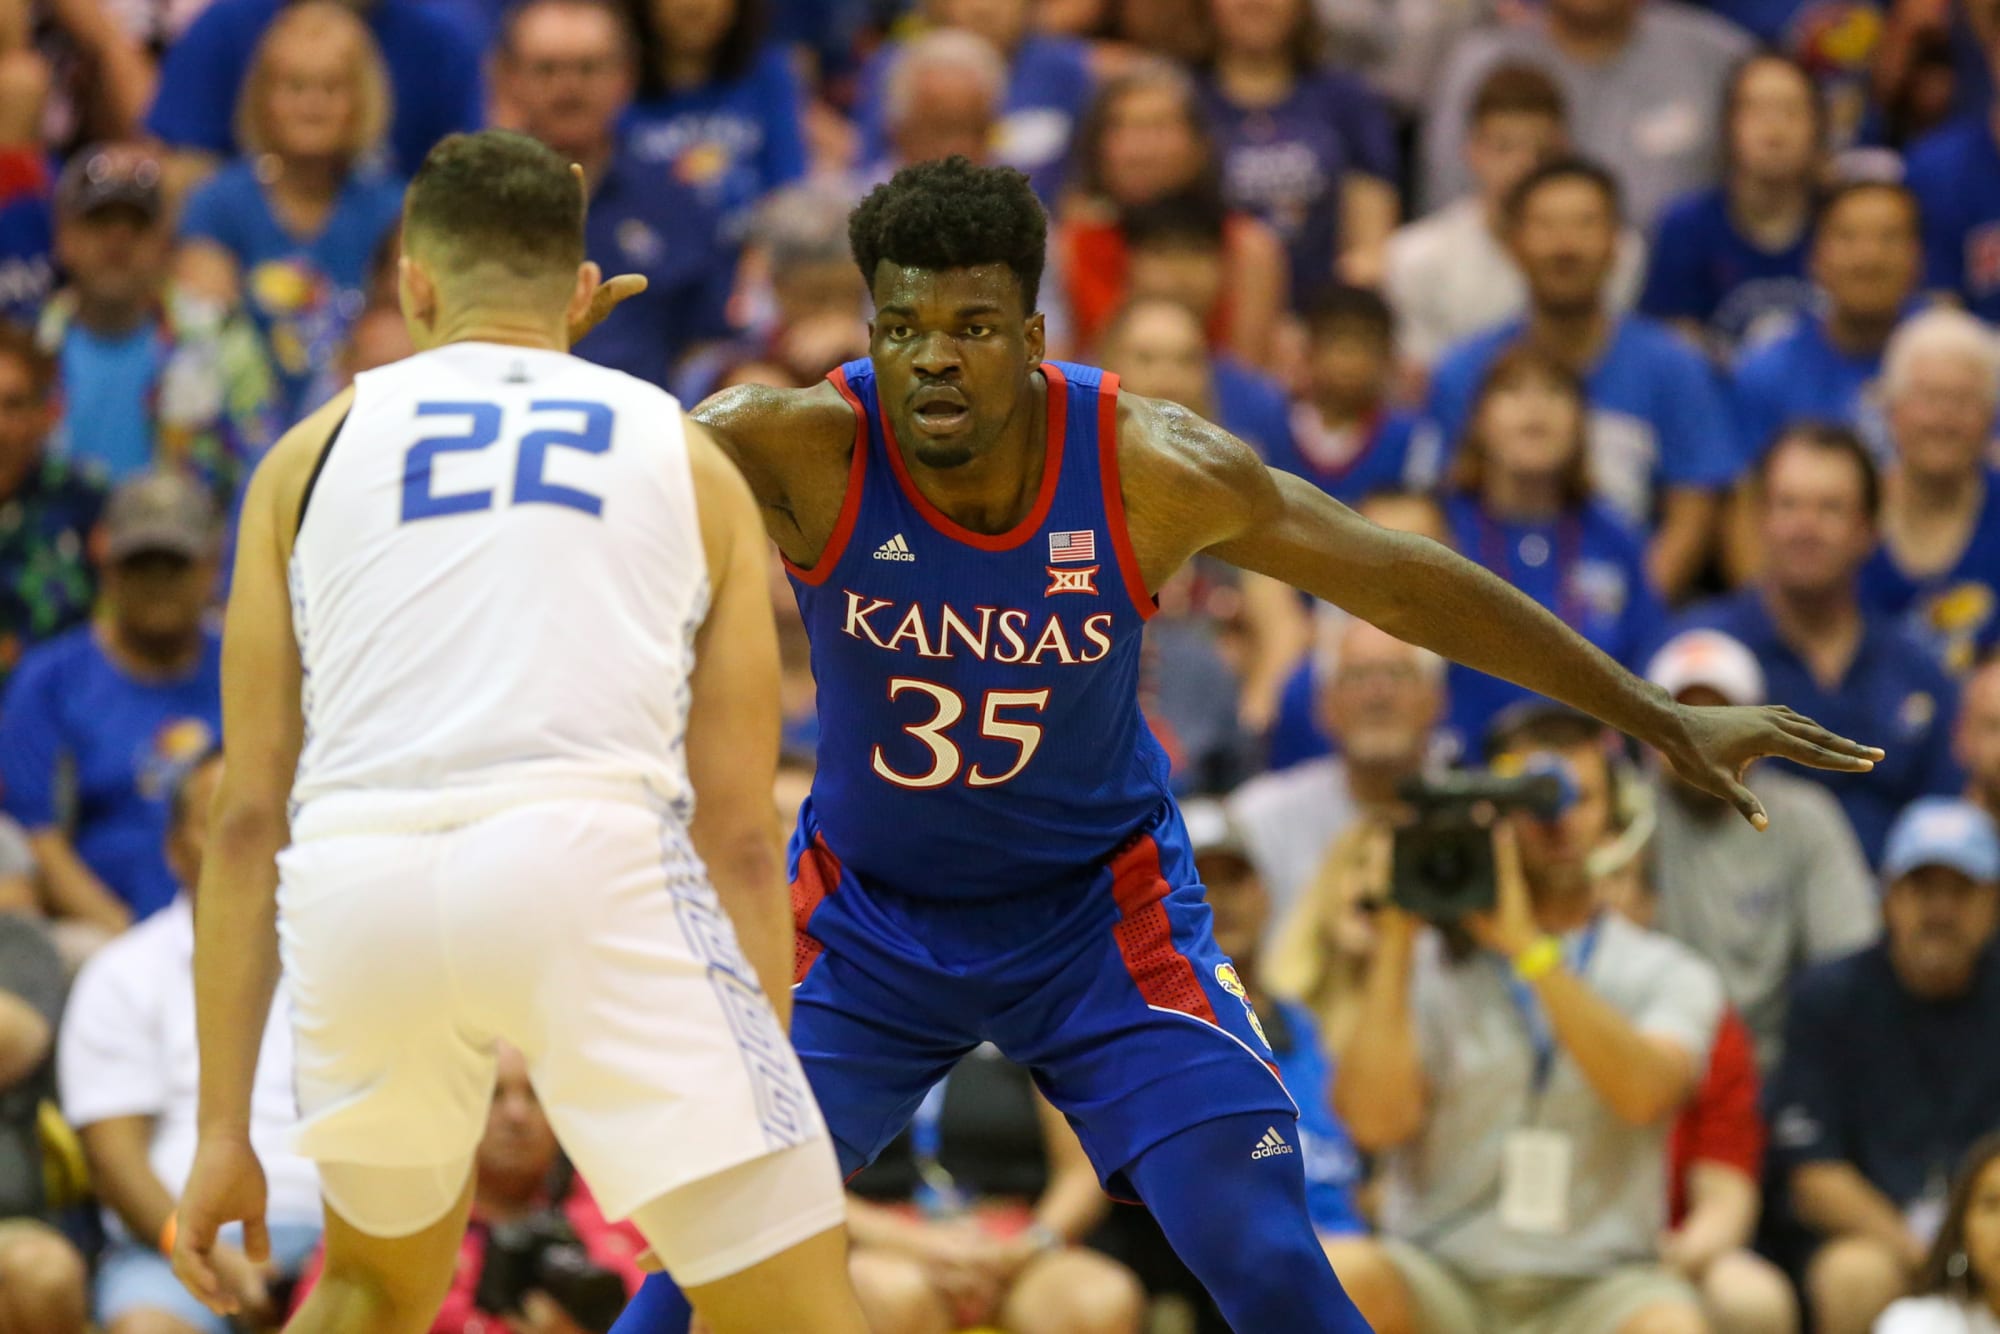 Kansas vs BYU: 2019-20 college basketball game preview, TV schedule